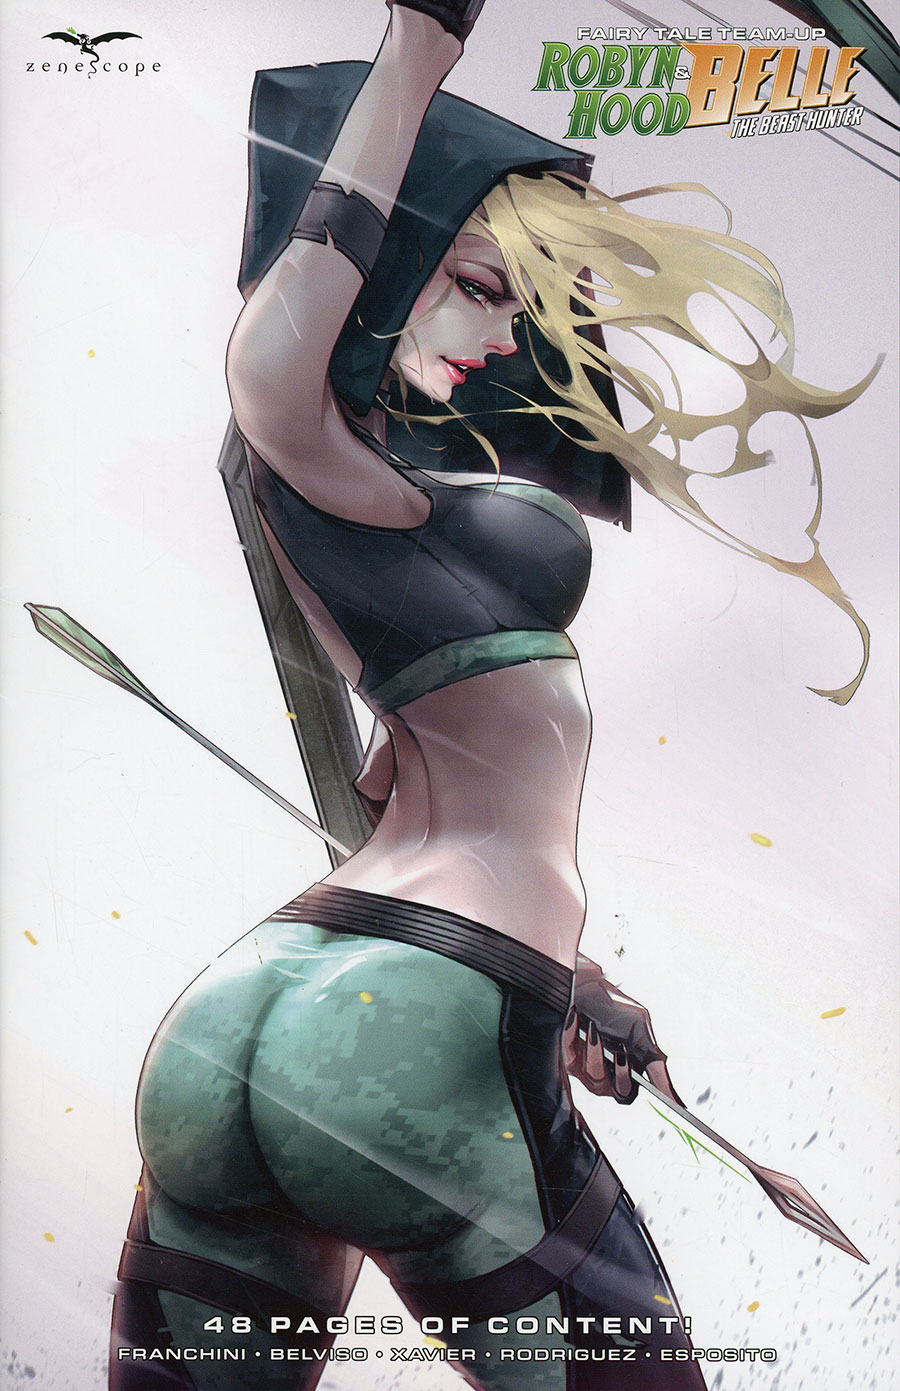 Grimm Fairy Tales Presents Fairy Tale Team-Up Robyn Hood & Belle The Beast Hunter #1 (One Shot) Cover C Ivan Tao